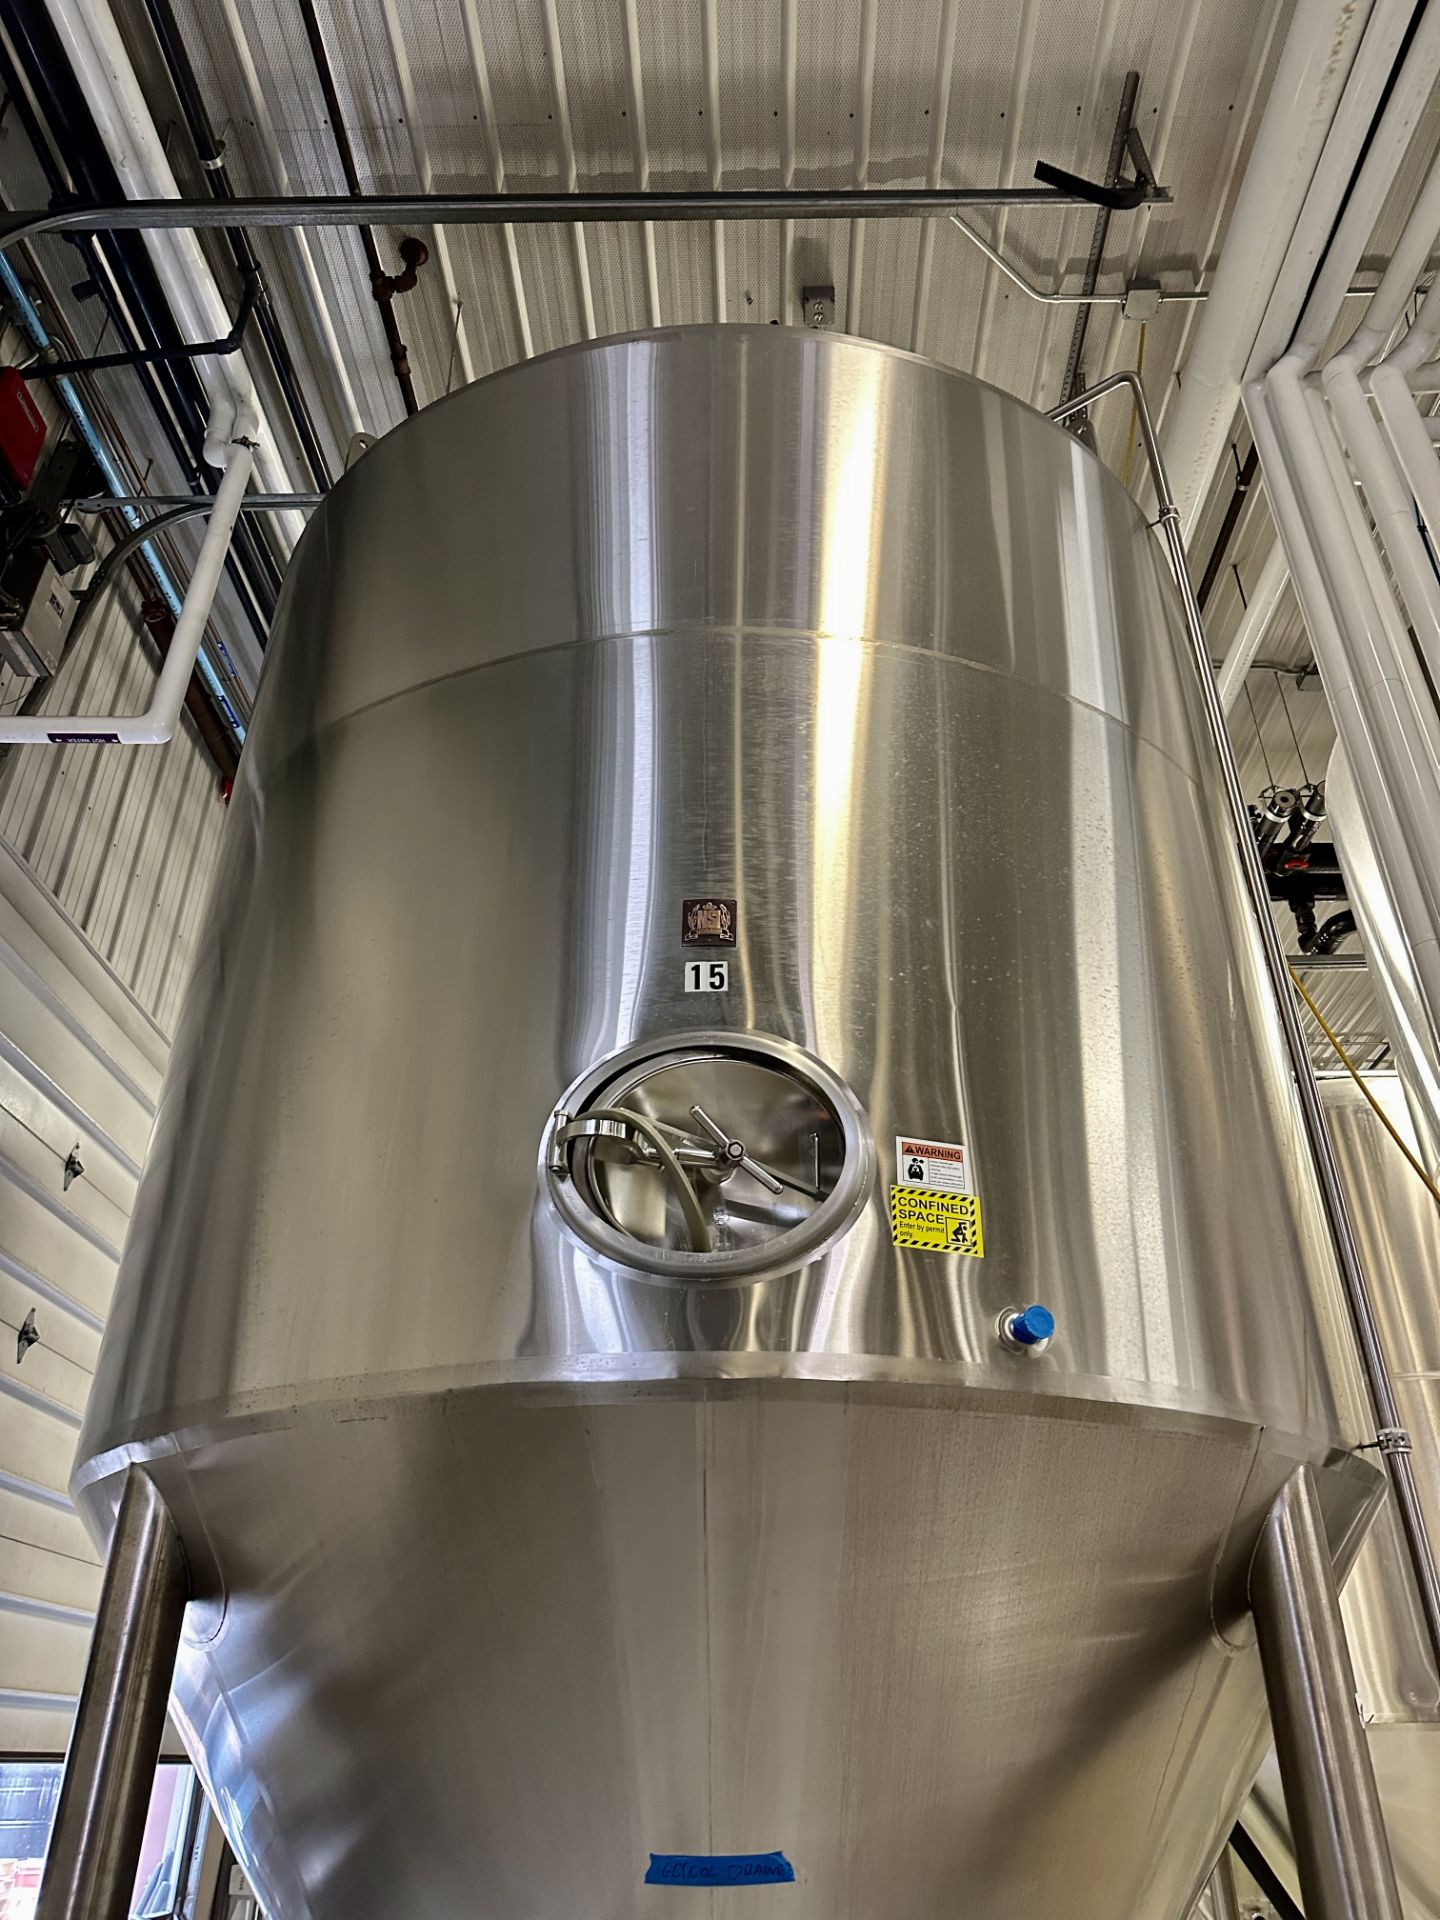 2015 NSI 150 BBL FV or 5,500 Gal Max Capacity Jacketed Fermentation Tank, Glycol Jacketed - Image 3 of 9